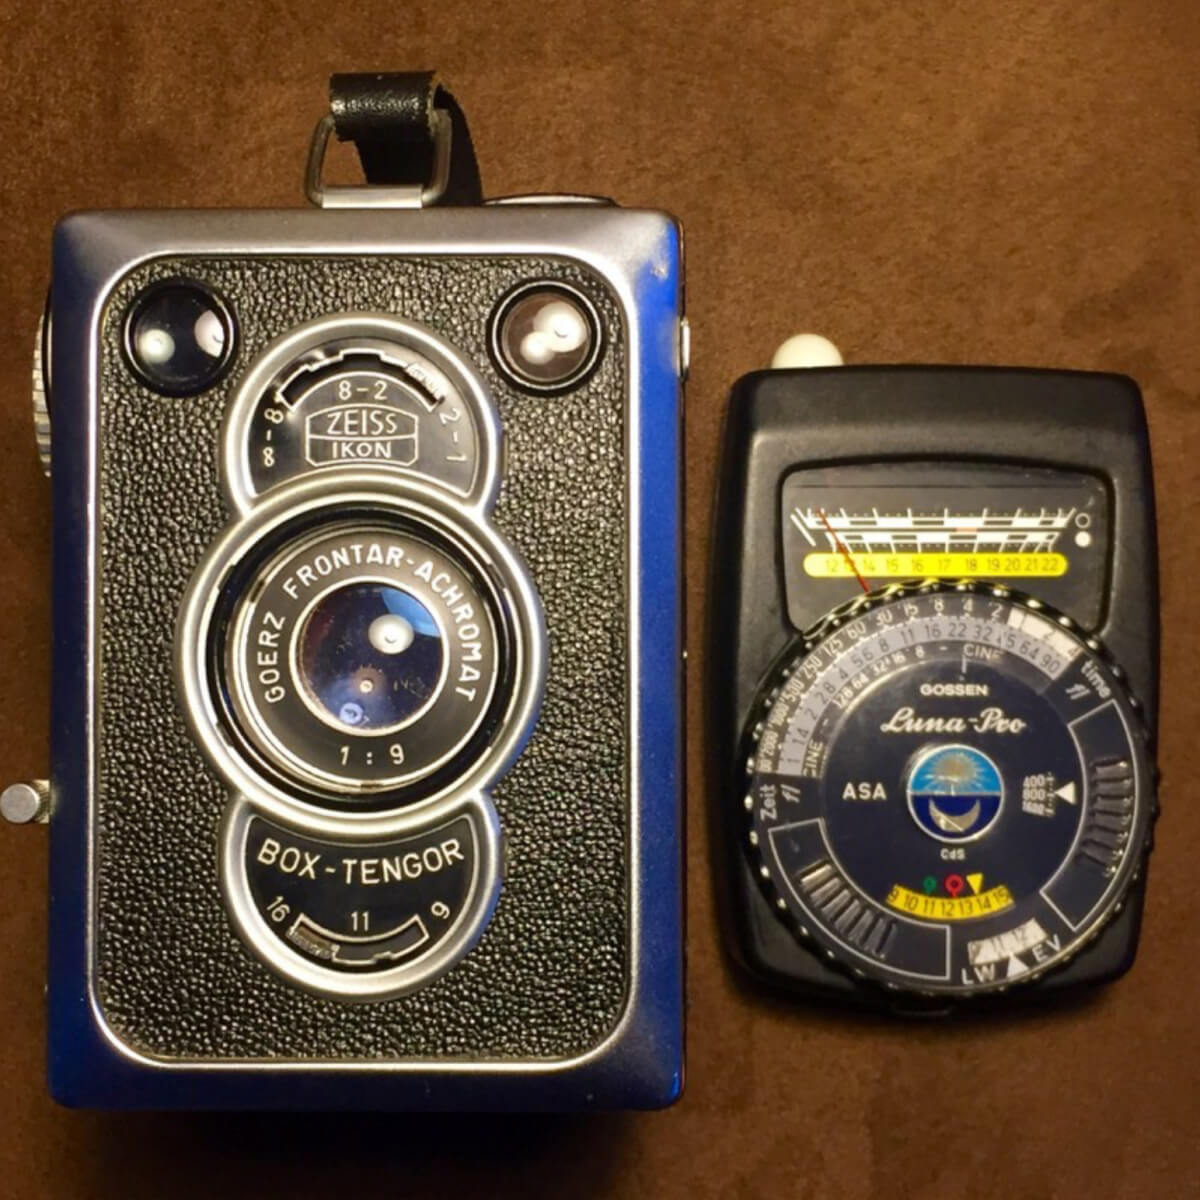 How-To: Push-metering for simple cameras